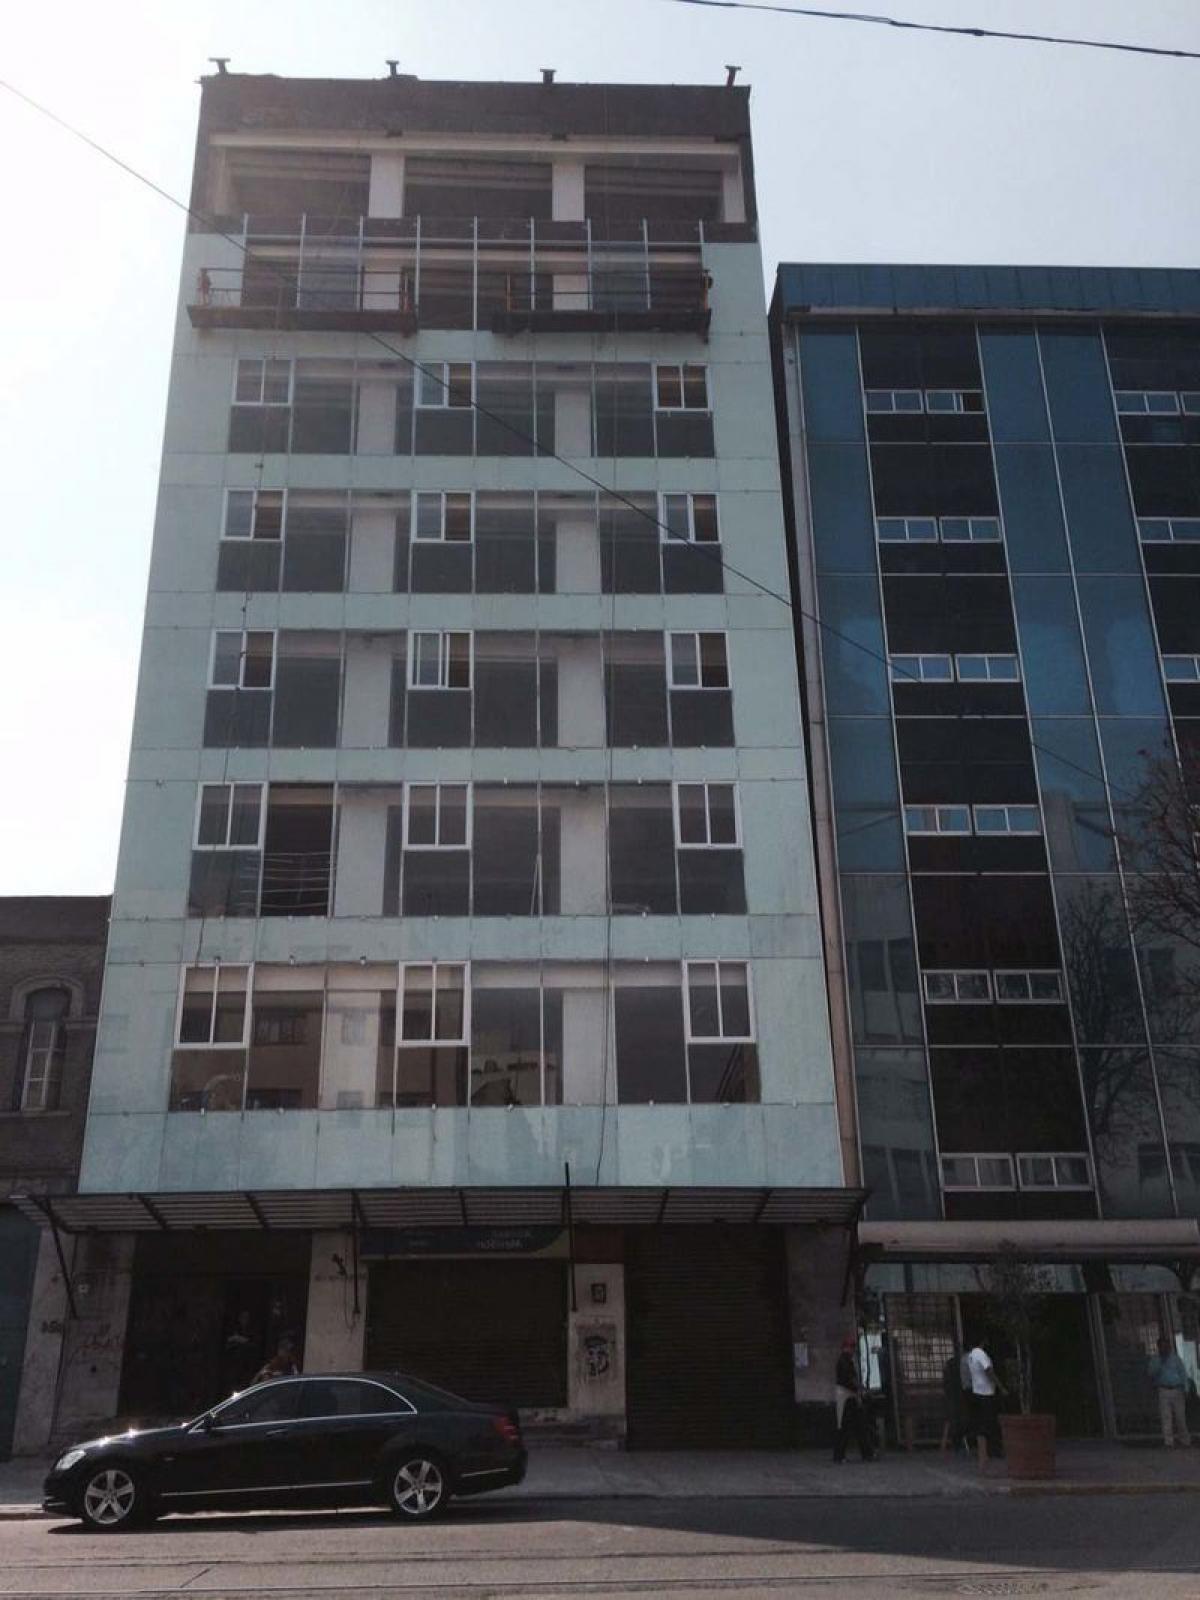 Picture of Apartment Building For Sale in Cuauhtemoc, Mexico City, Mexico